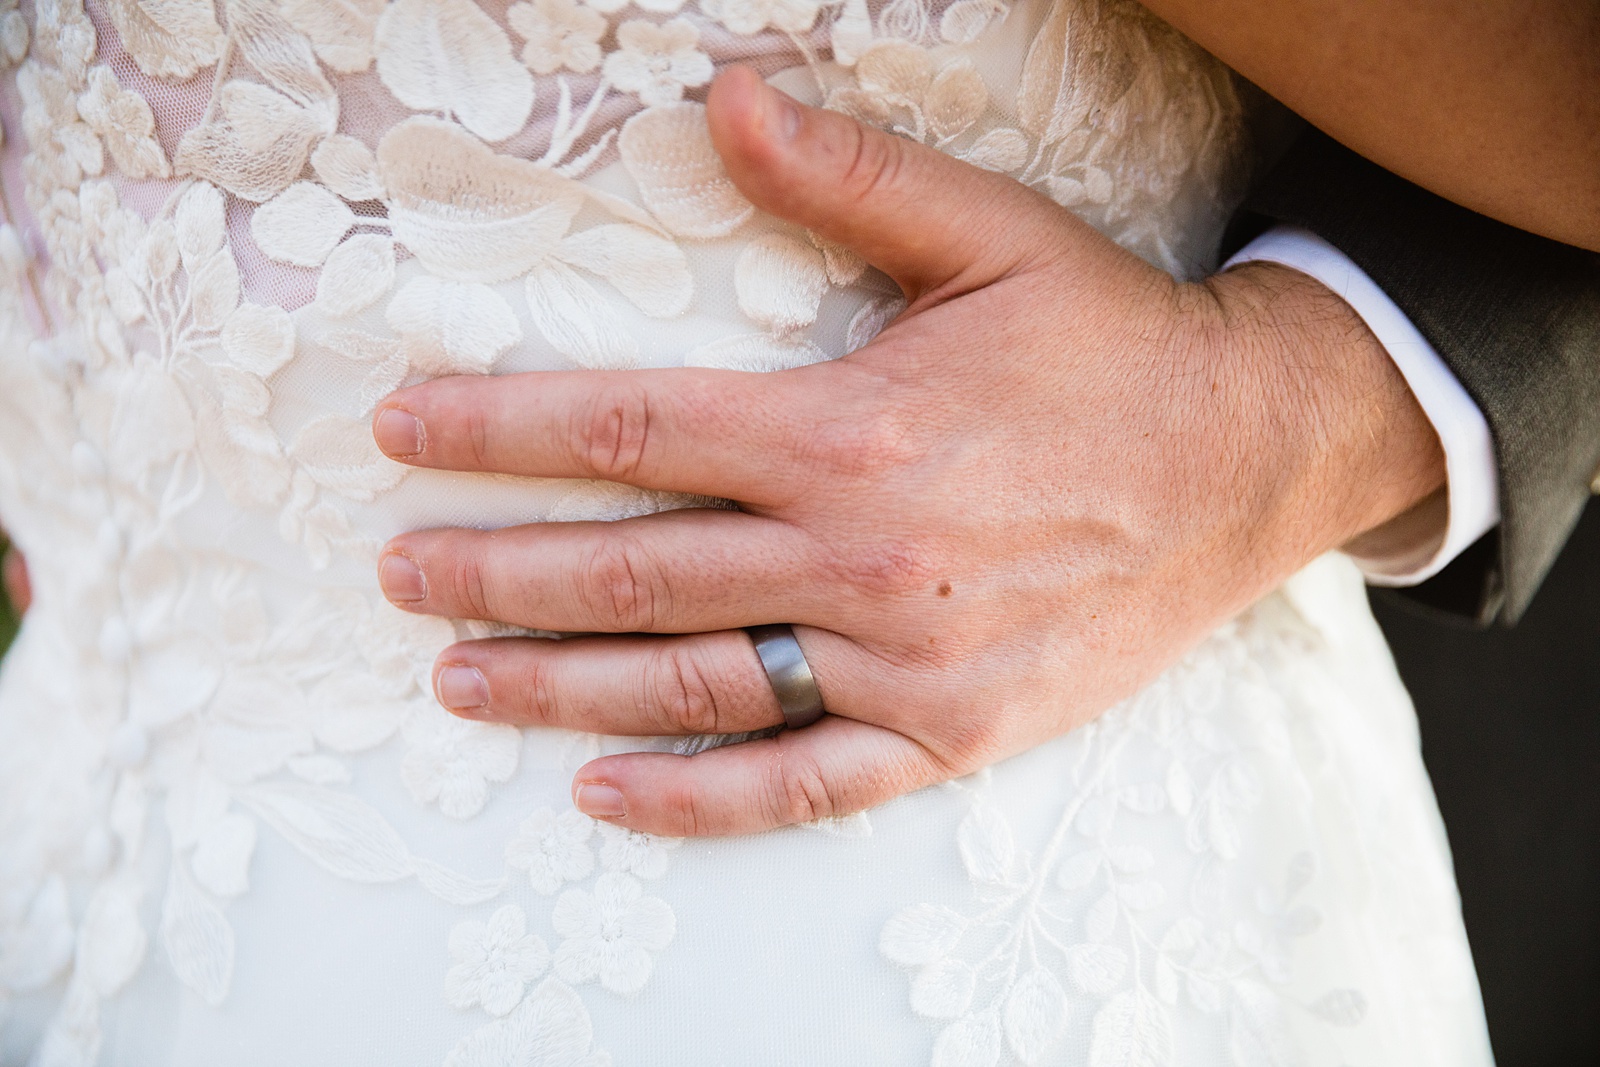 Groom's wedding ring detail as couple looks at each other at their Mogollon Rim elopement by Northern Arizona elopement photographer PMA Photography.